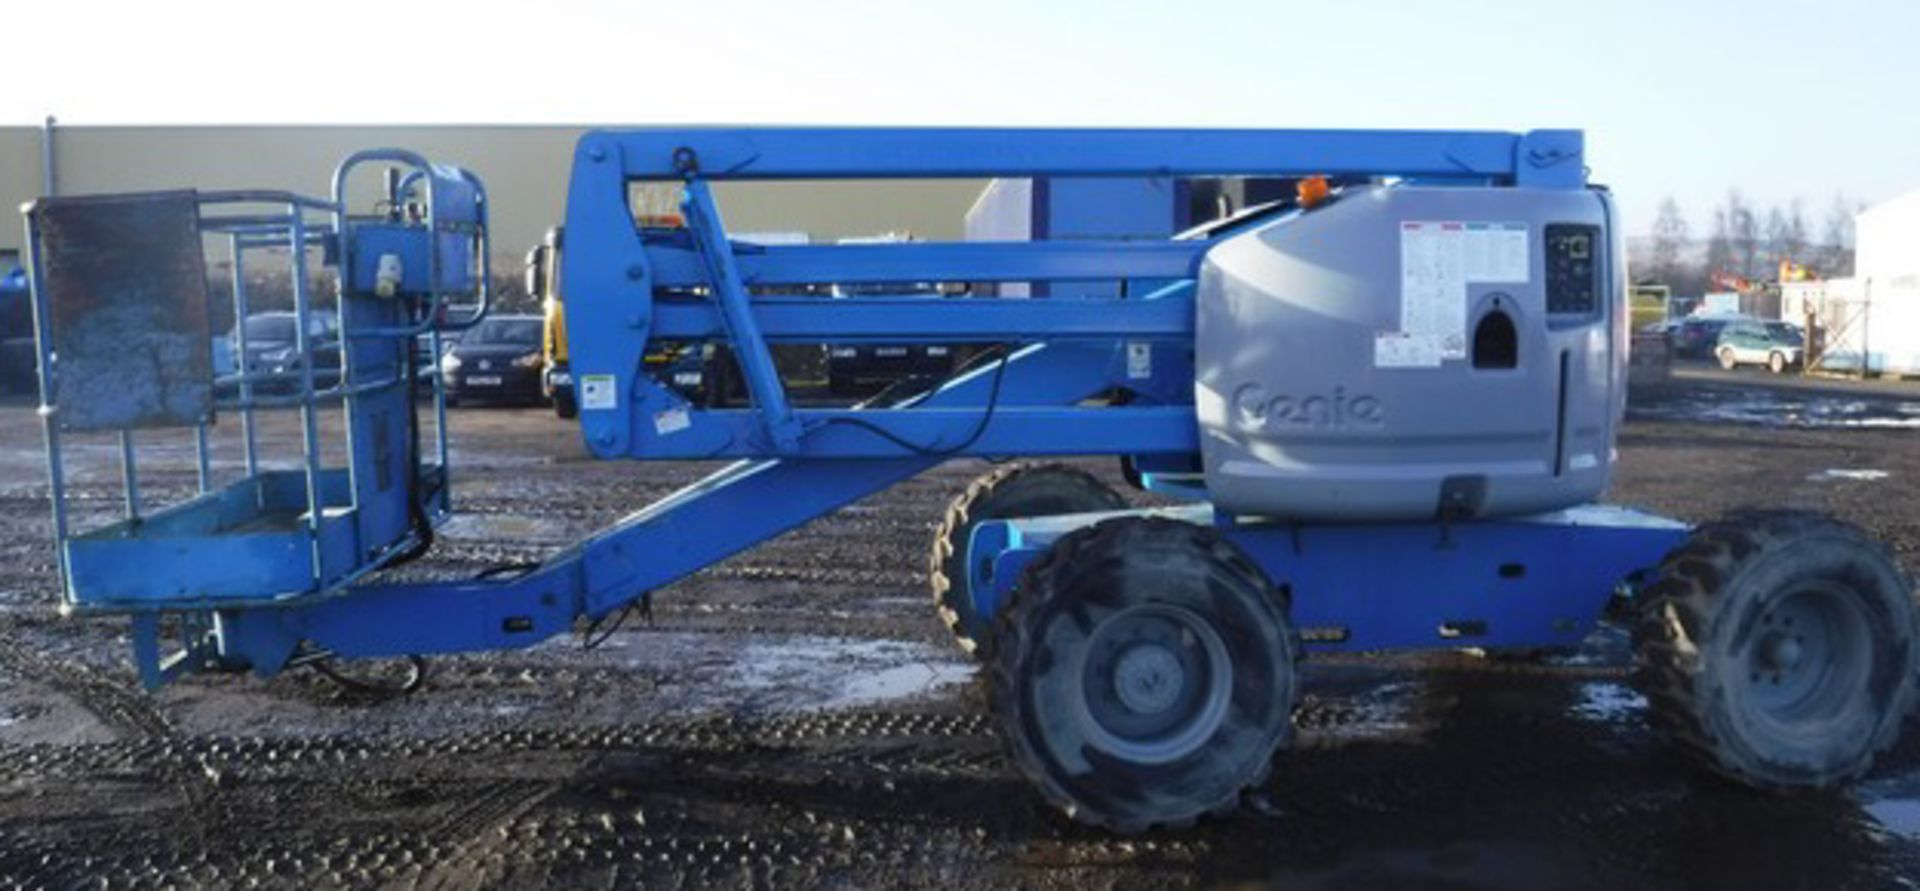 2000 GENIE MODEL Z45-25, S/N 15155, 8046HRS (NOT VERIFIED), LIFT CAPACITY - 230 - Image 16 of 17